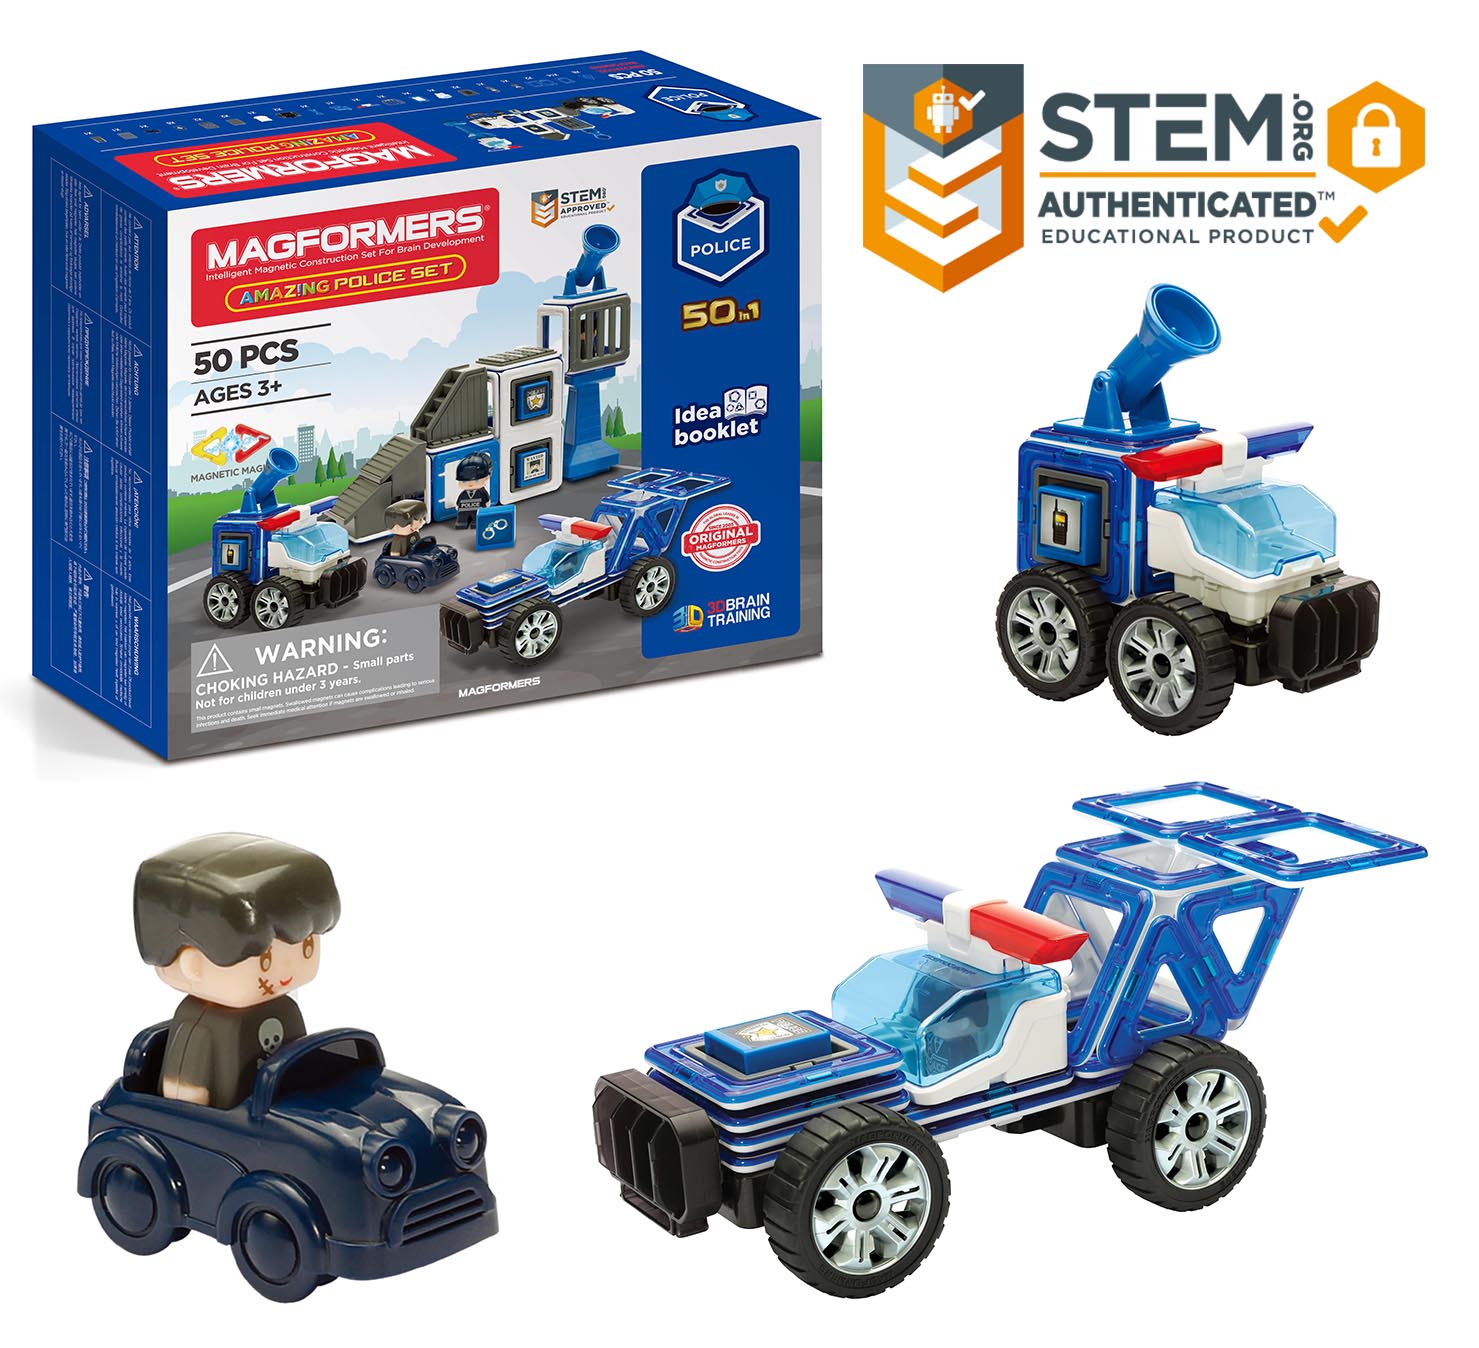 Magformers Amazing Police 50 Pieces, Wheels, Blue red colors, Magnetic Geometric tiles STEM Toy Ages 3+ - image 3 of 5